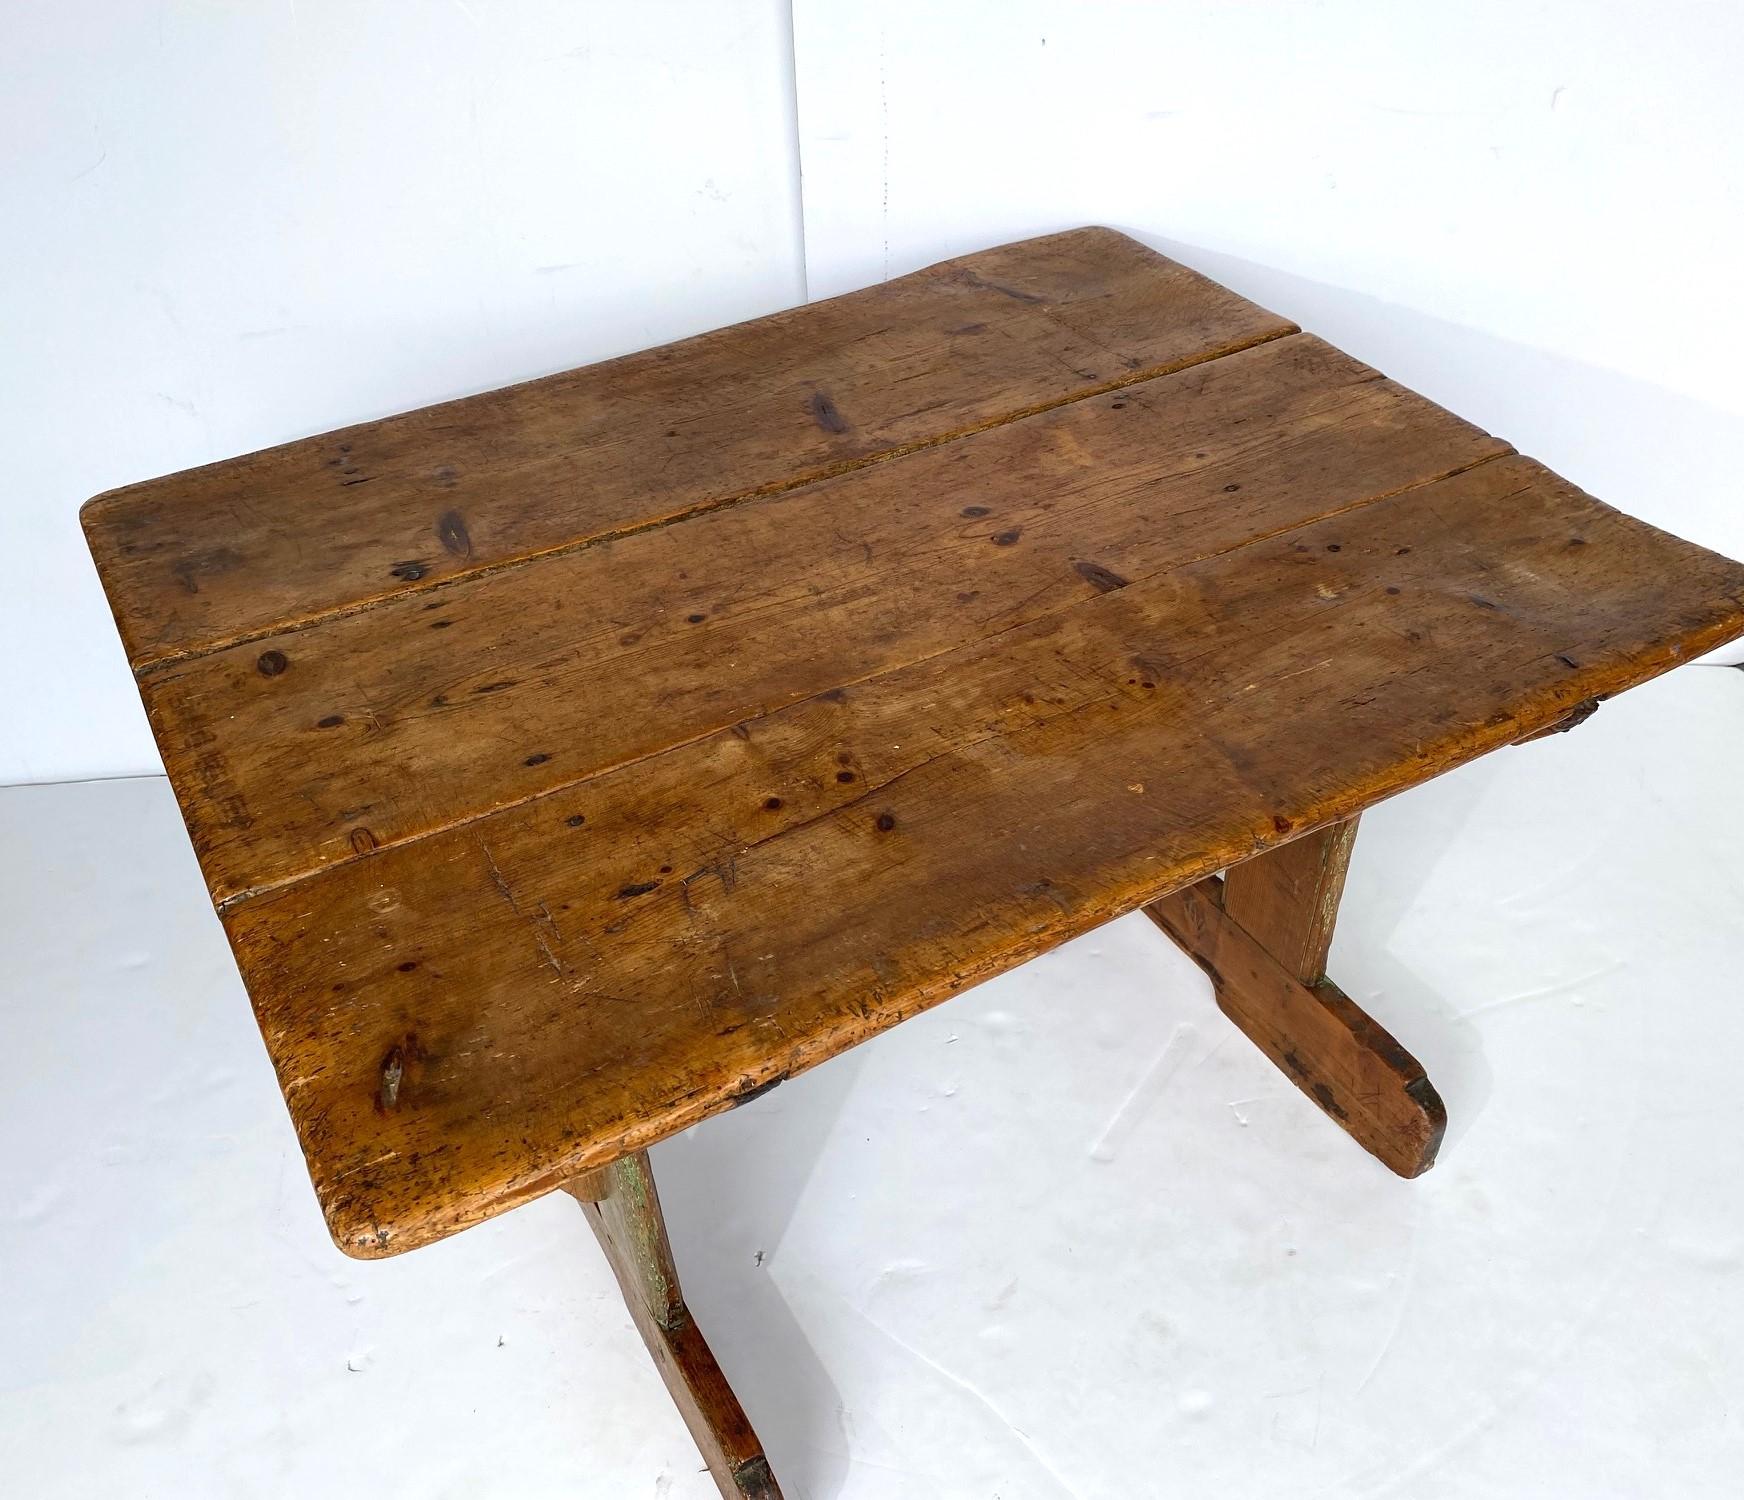 Primitive 19th-Century French pine accent table or coffee table.